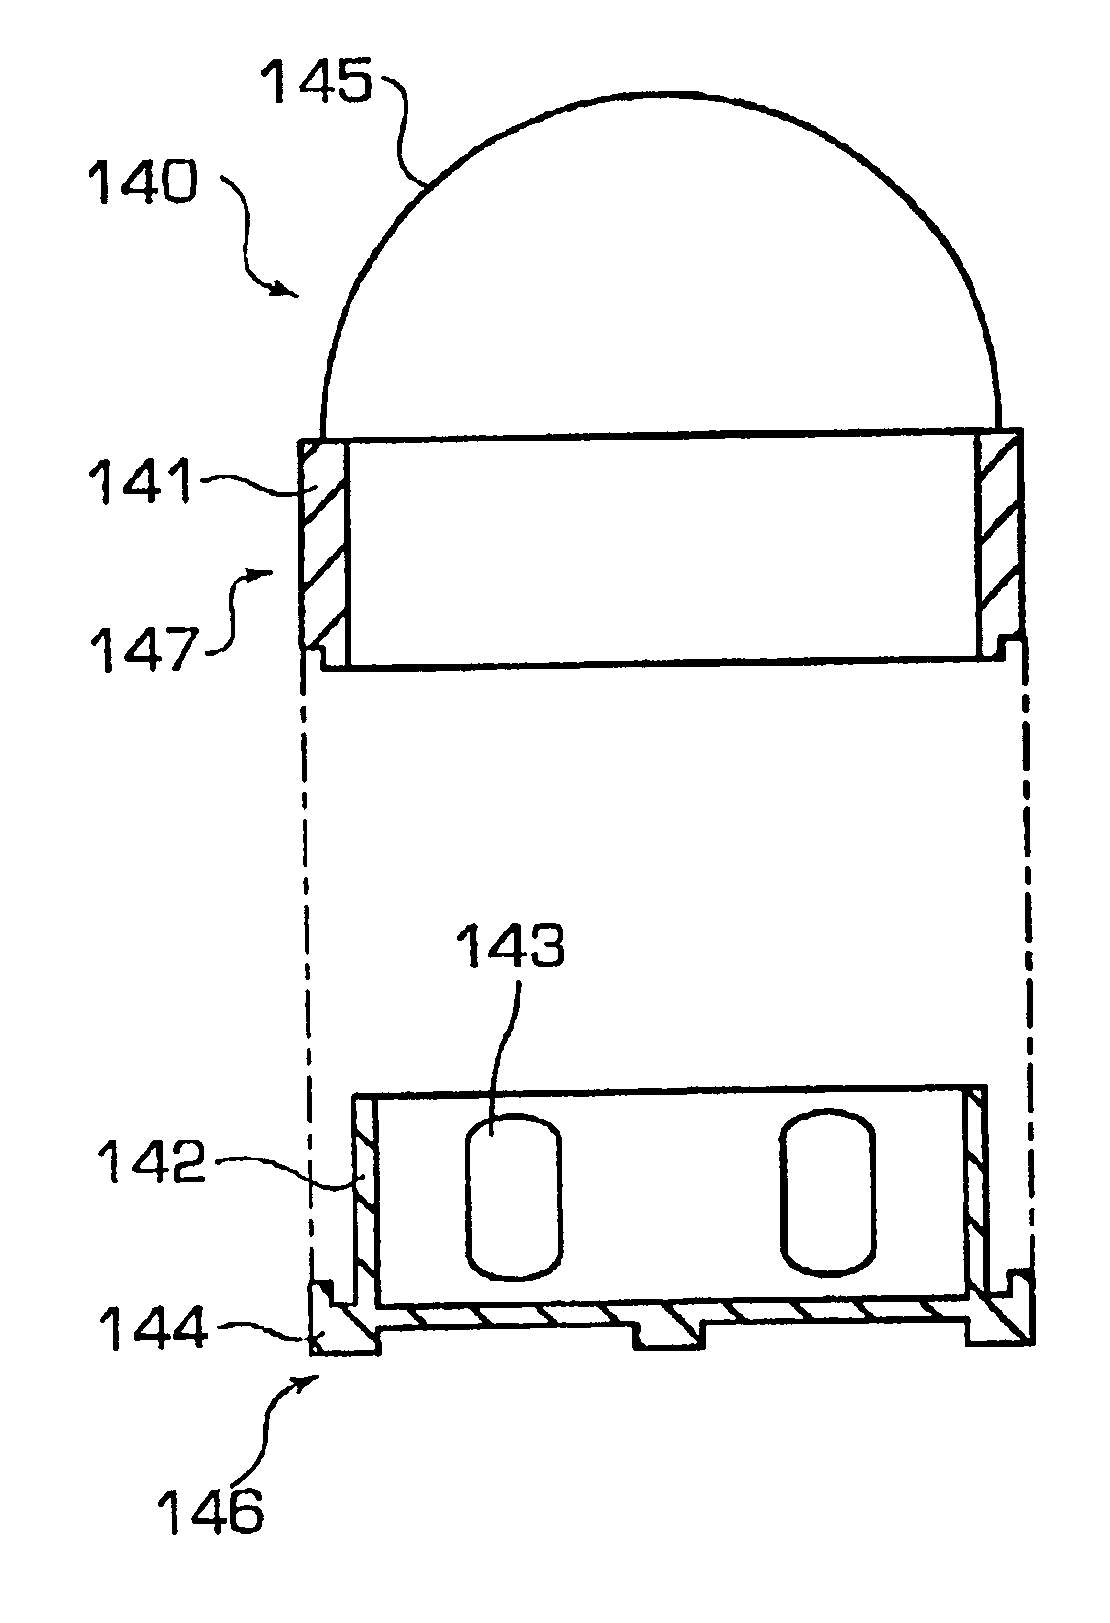 Holder for use in semiconductor device manufacturing and bio-medical sample processing